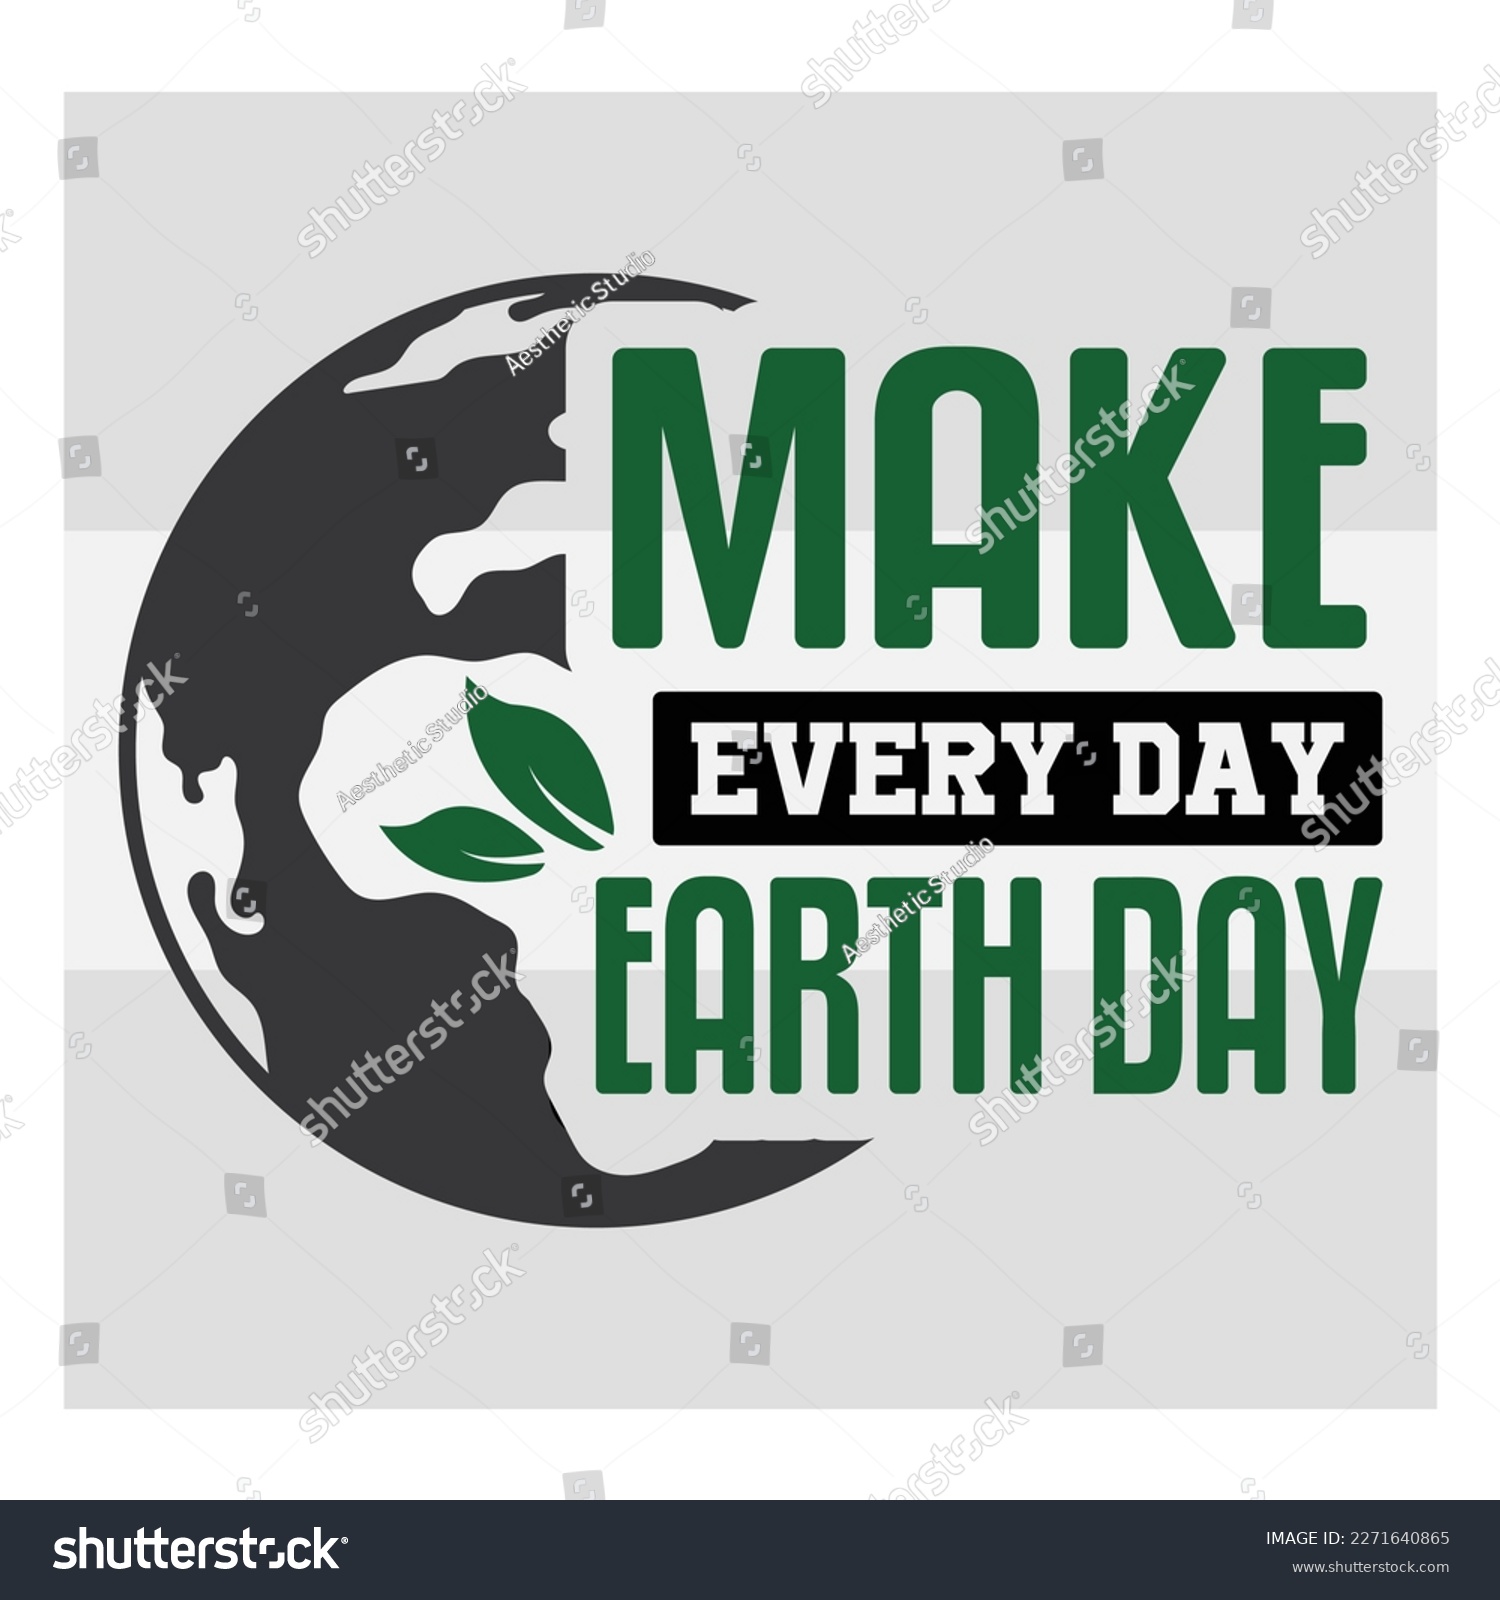 SVG of Make Every Day, Make Every Day Svg, Earth Day Every Svg, Happy Earth, Earth Day, Celebration Svg, April 22, Typography, Quotes, Cut File, Global,  T-shirt Design, SVG, EPS svg